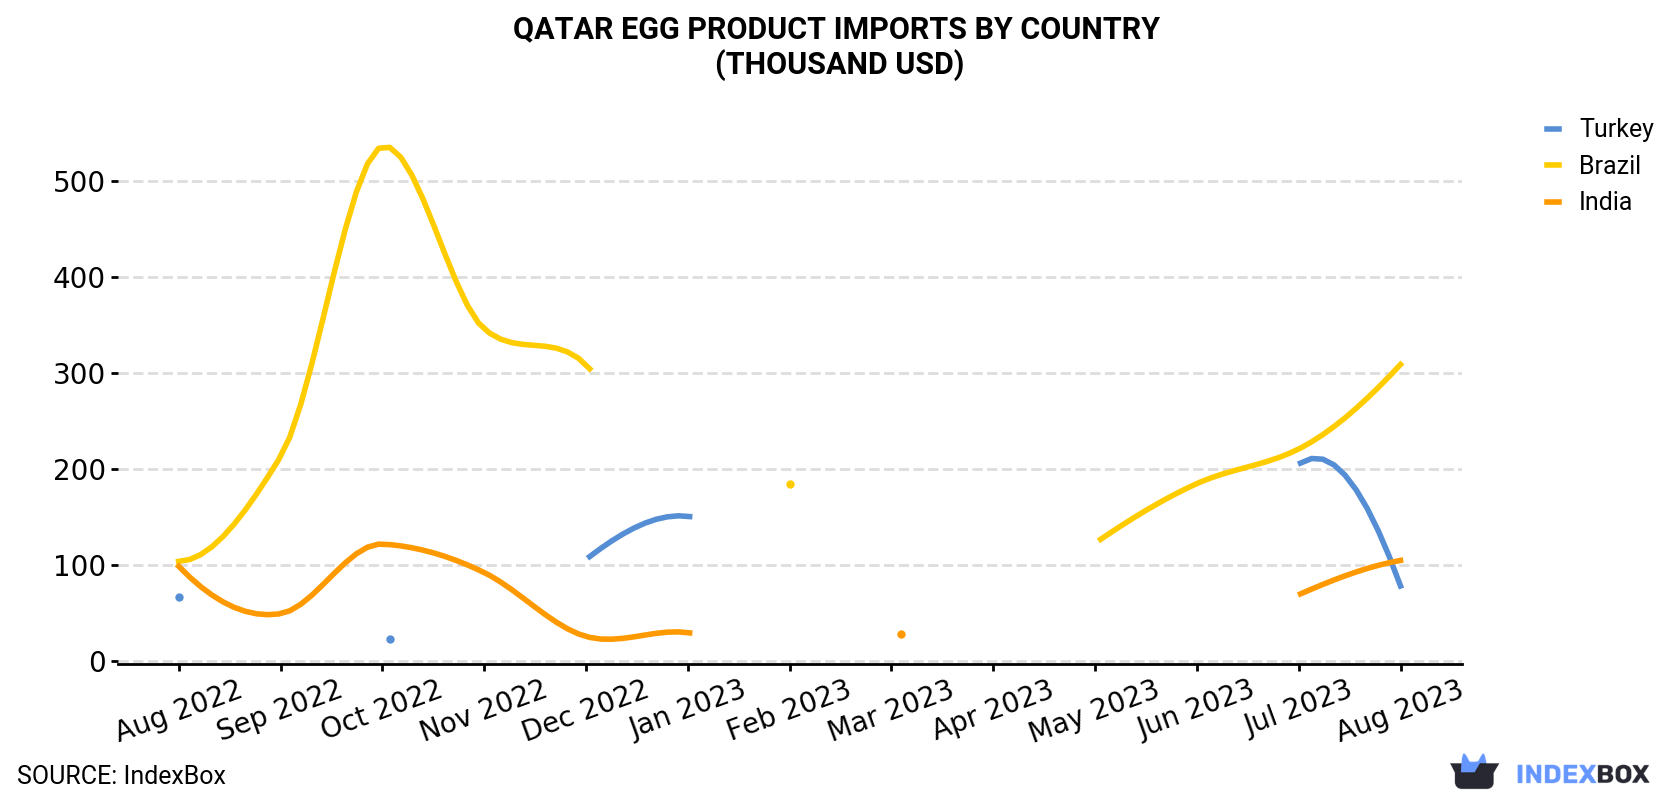 Qatar Egg Product Imports By Country (Thousand USD)